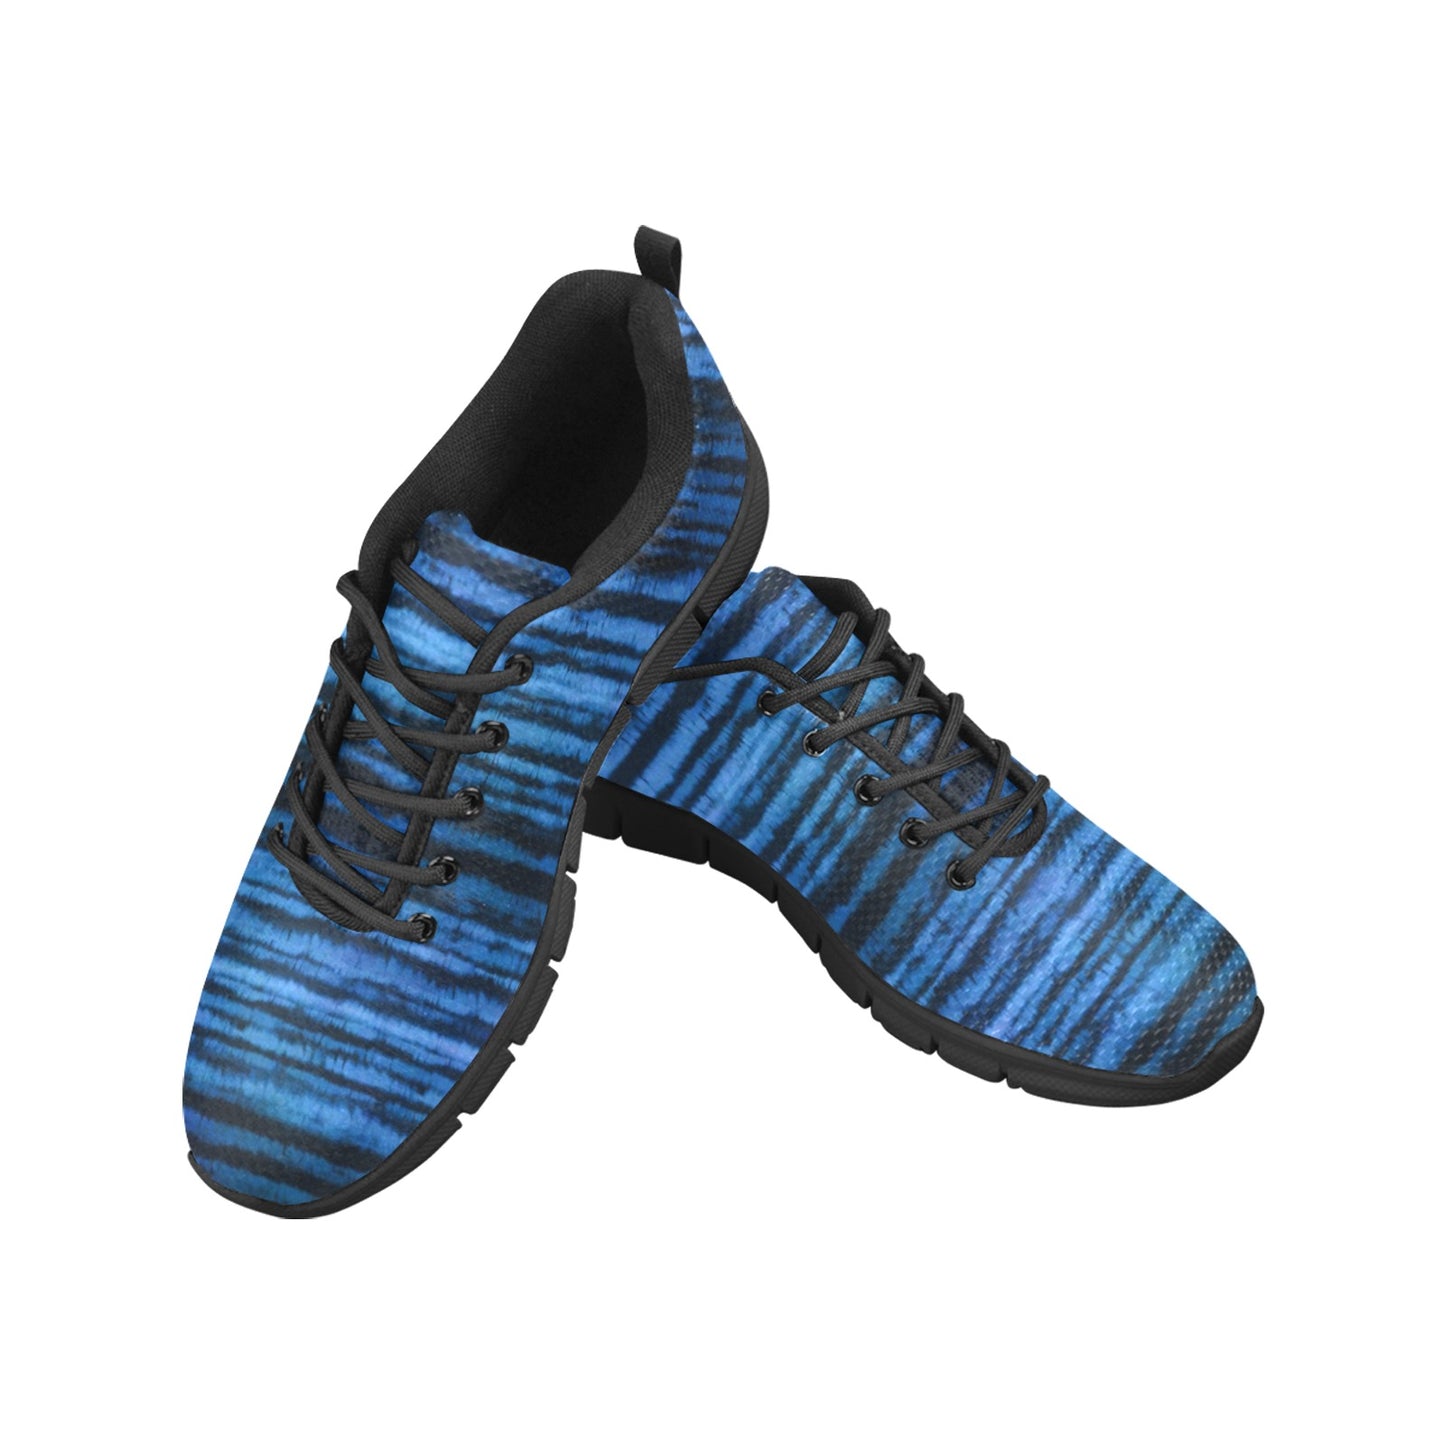 Blue Black Men Breathable Sneakers, Striped Pattern Print Lace Up Comfortable Designer Casual Mesh Dress Shoes Trainers